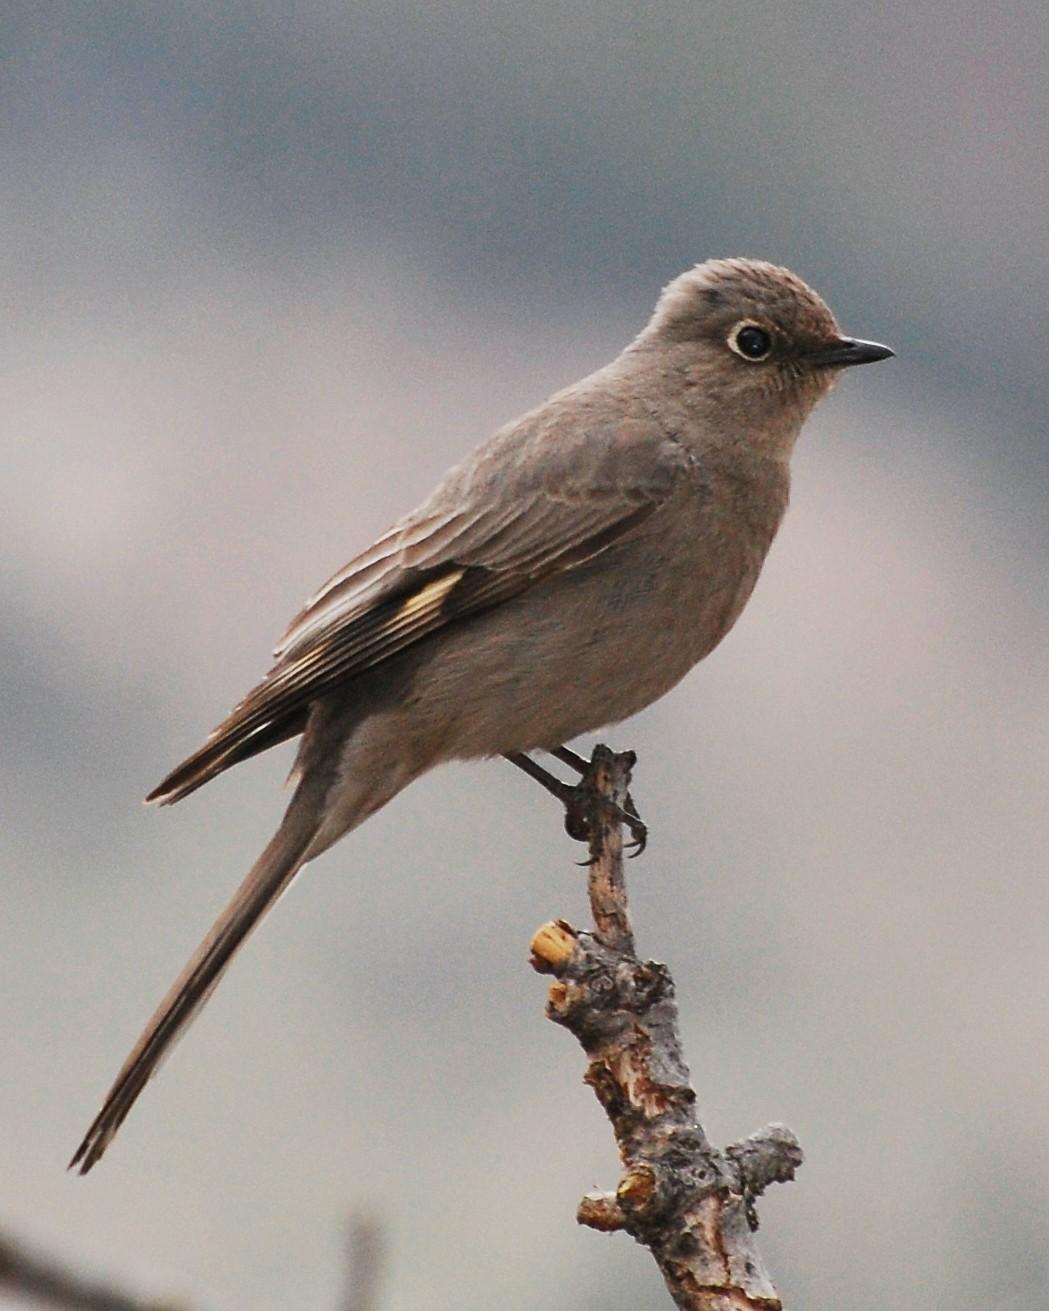 Townsend's Solitaire Photo by David Hollie